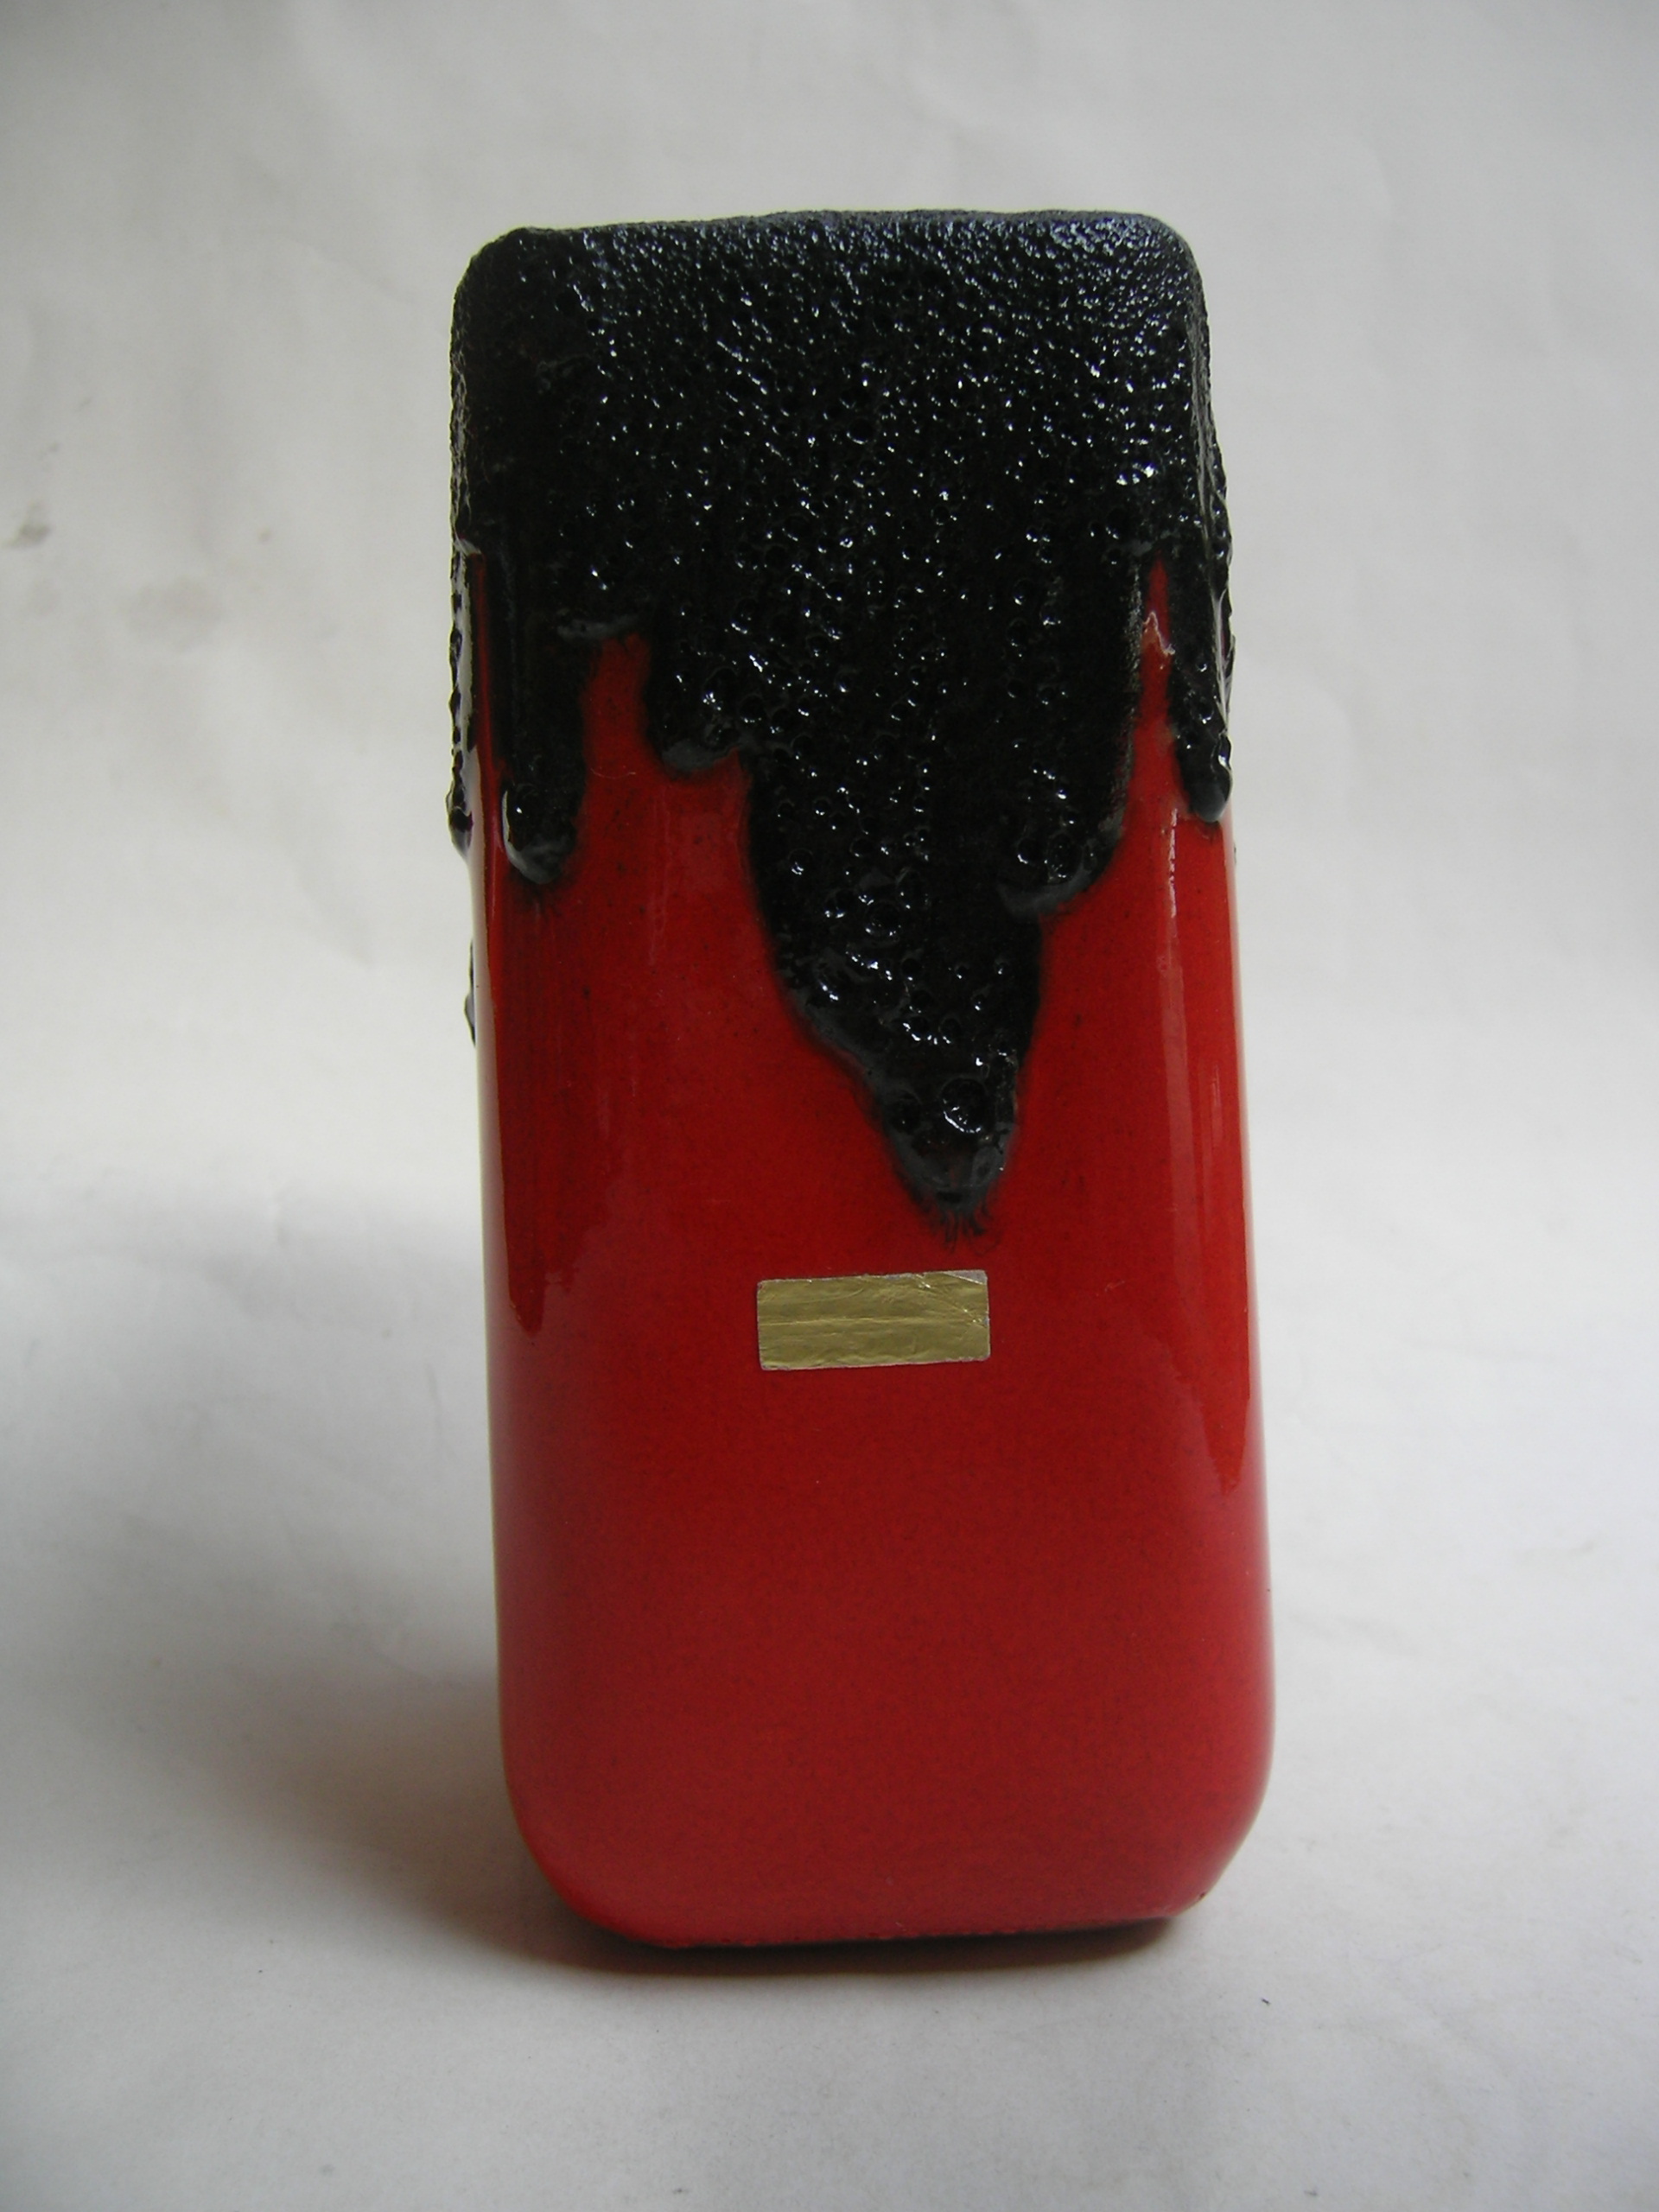 Roth - Unmarked red and Black West German Lava Vase